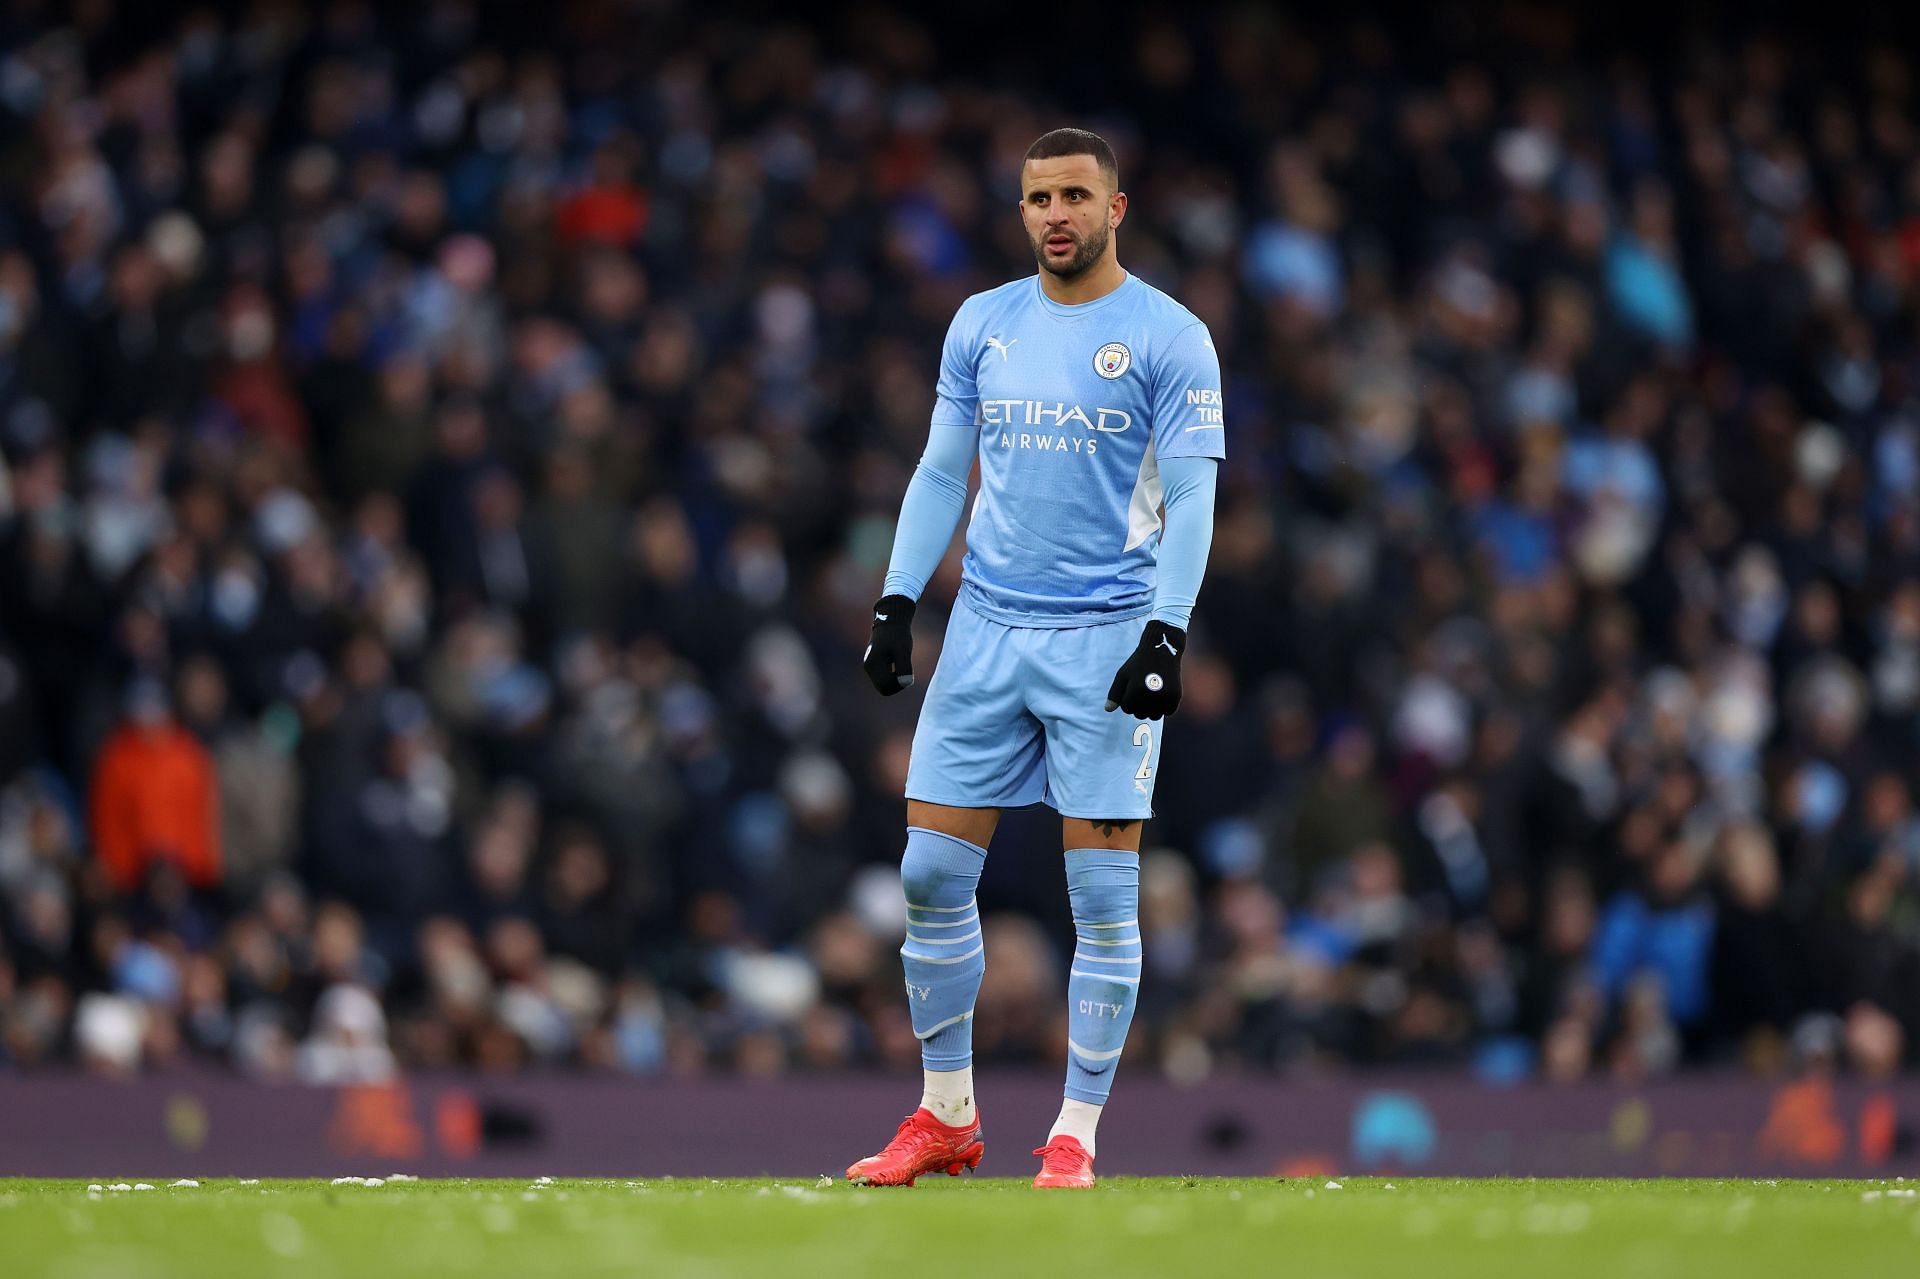 Kyle Walker has emerged as a key player for Manchester City